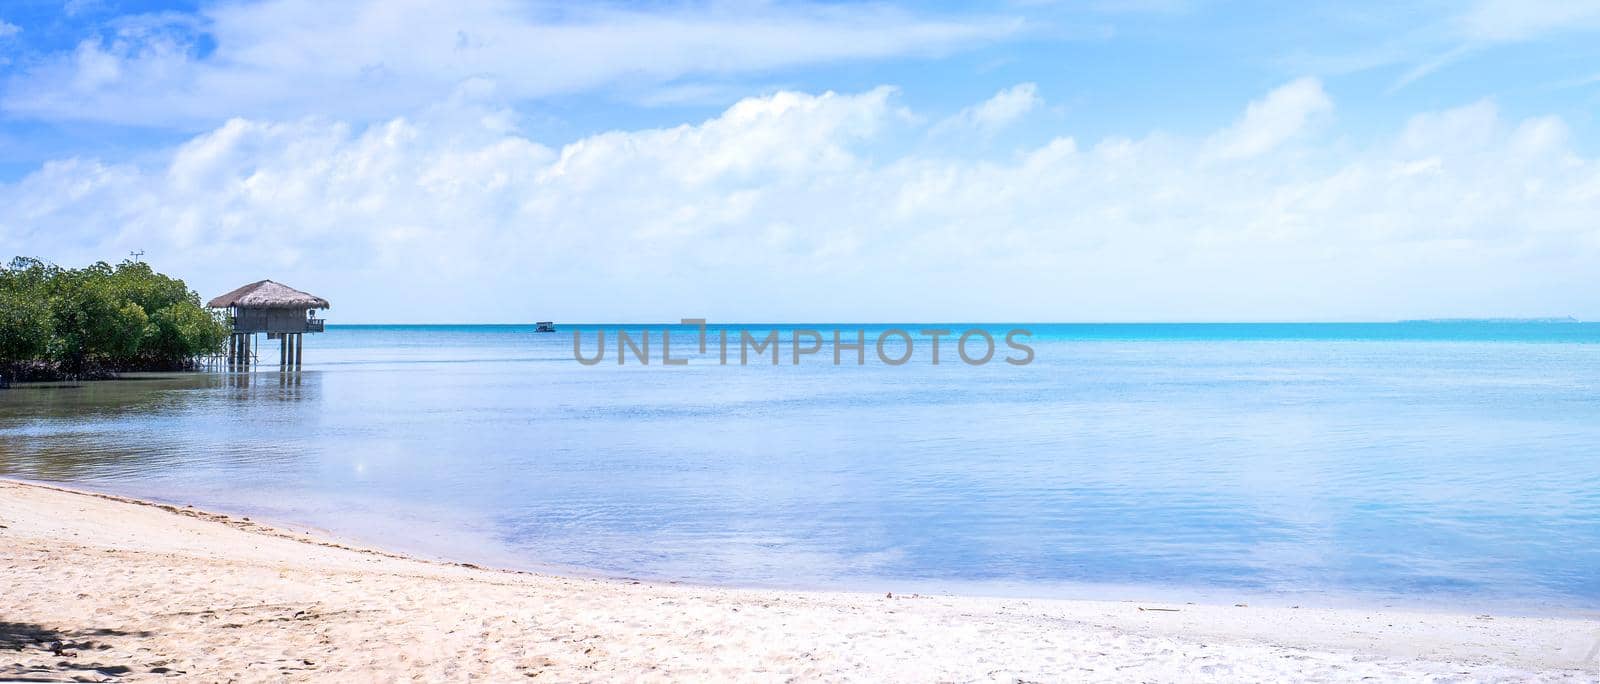 Chairs on the amazing beautiful sandy beach near the ocean with blue sky. Concept of summer leisure calm vacation for a tourism idea. Empty copy space, inspiration of tropical landscape